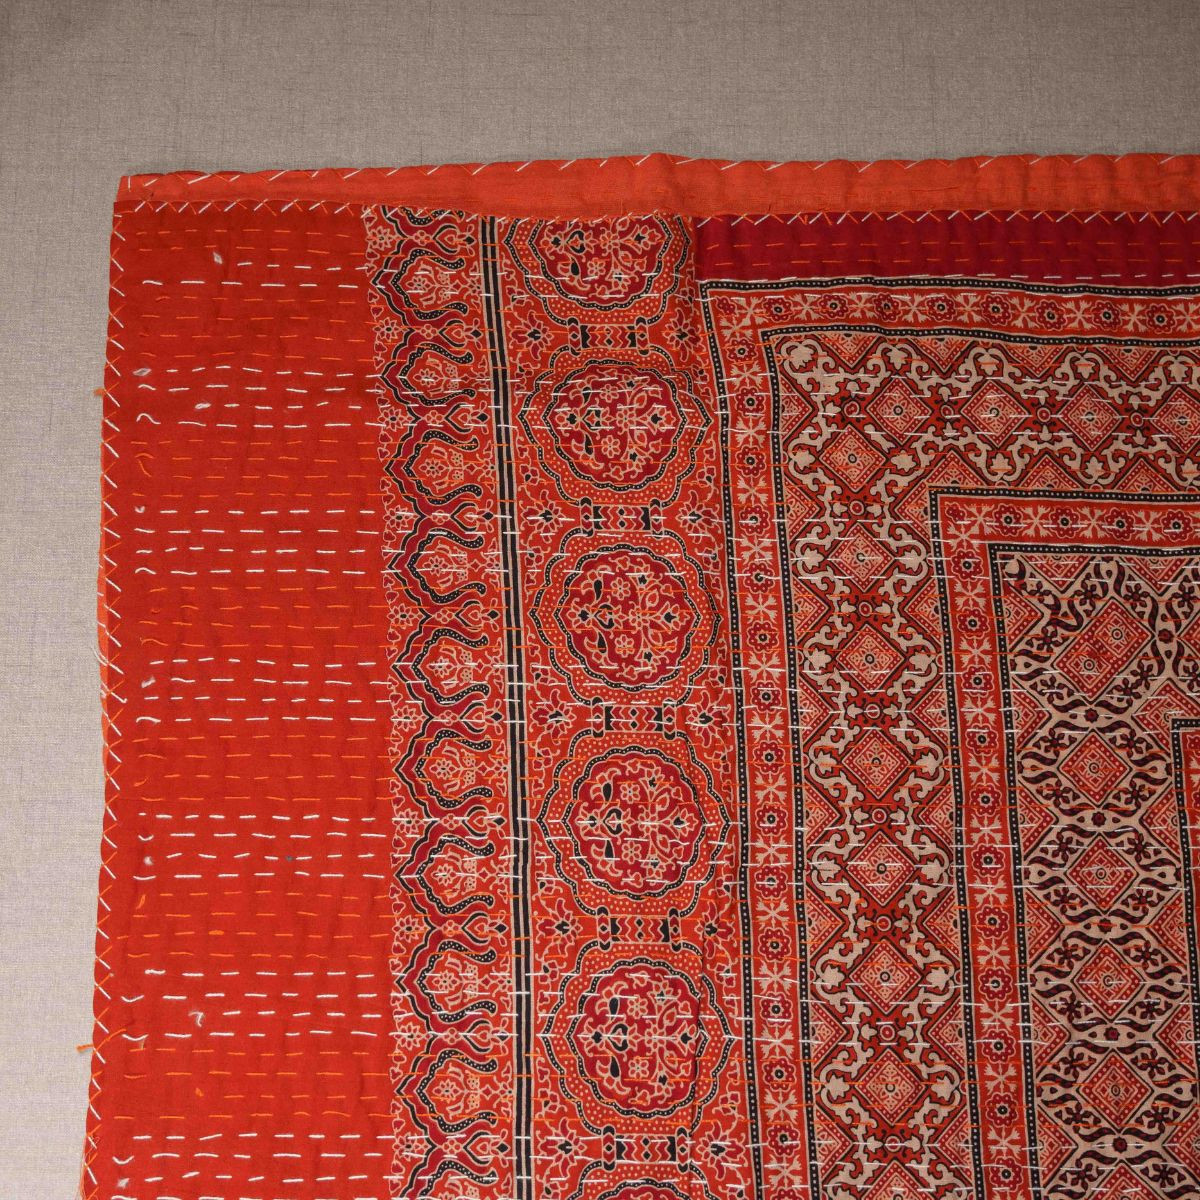 Double Scarlet Kantha Quilt